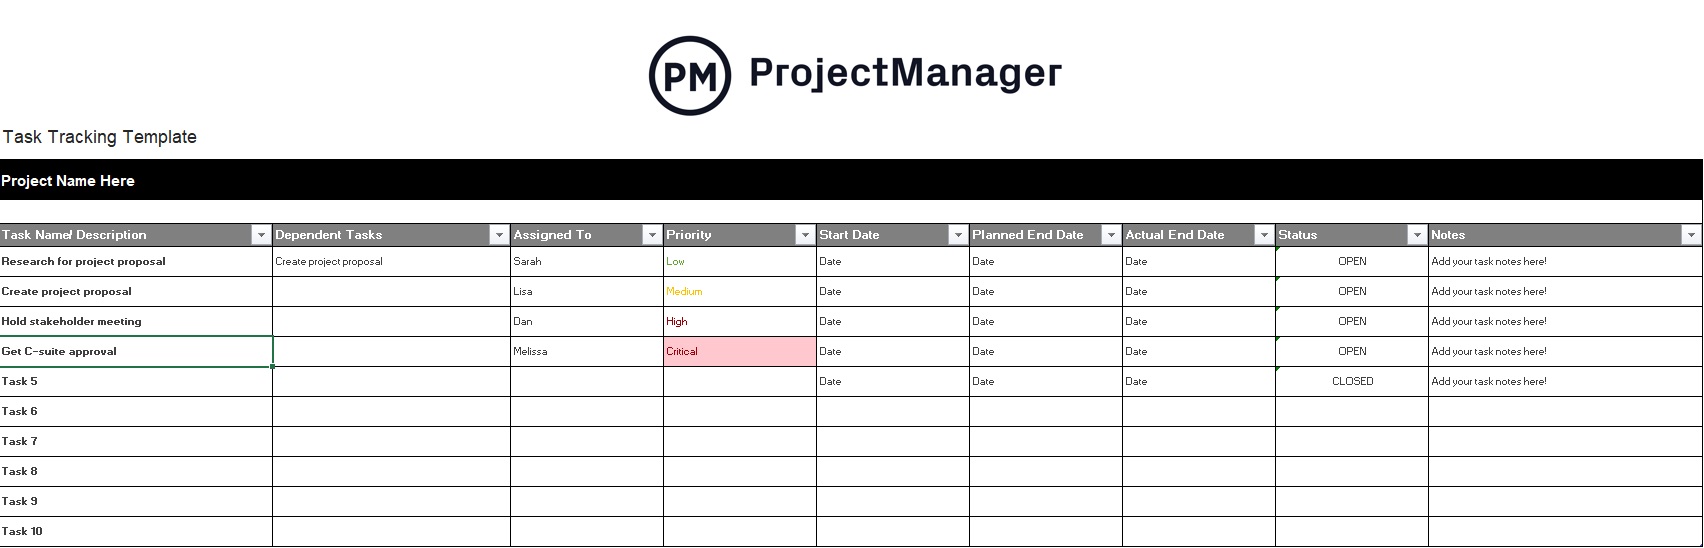 ProjectManager's free task tracking template